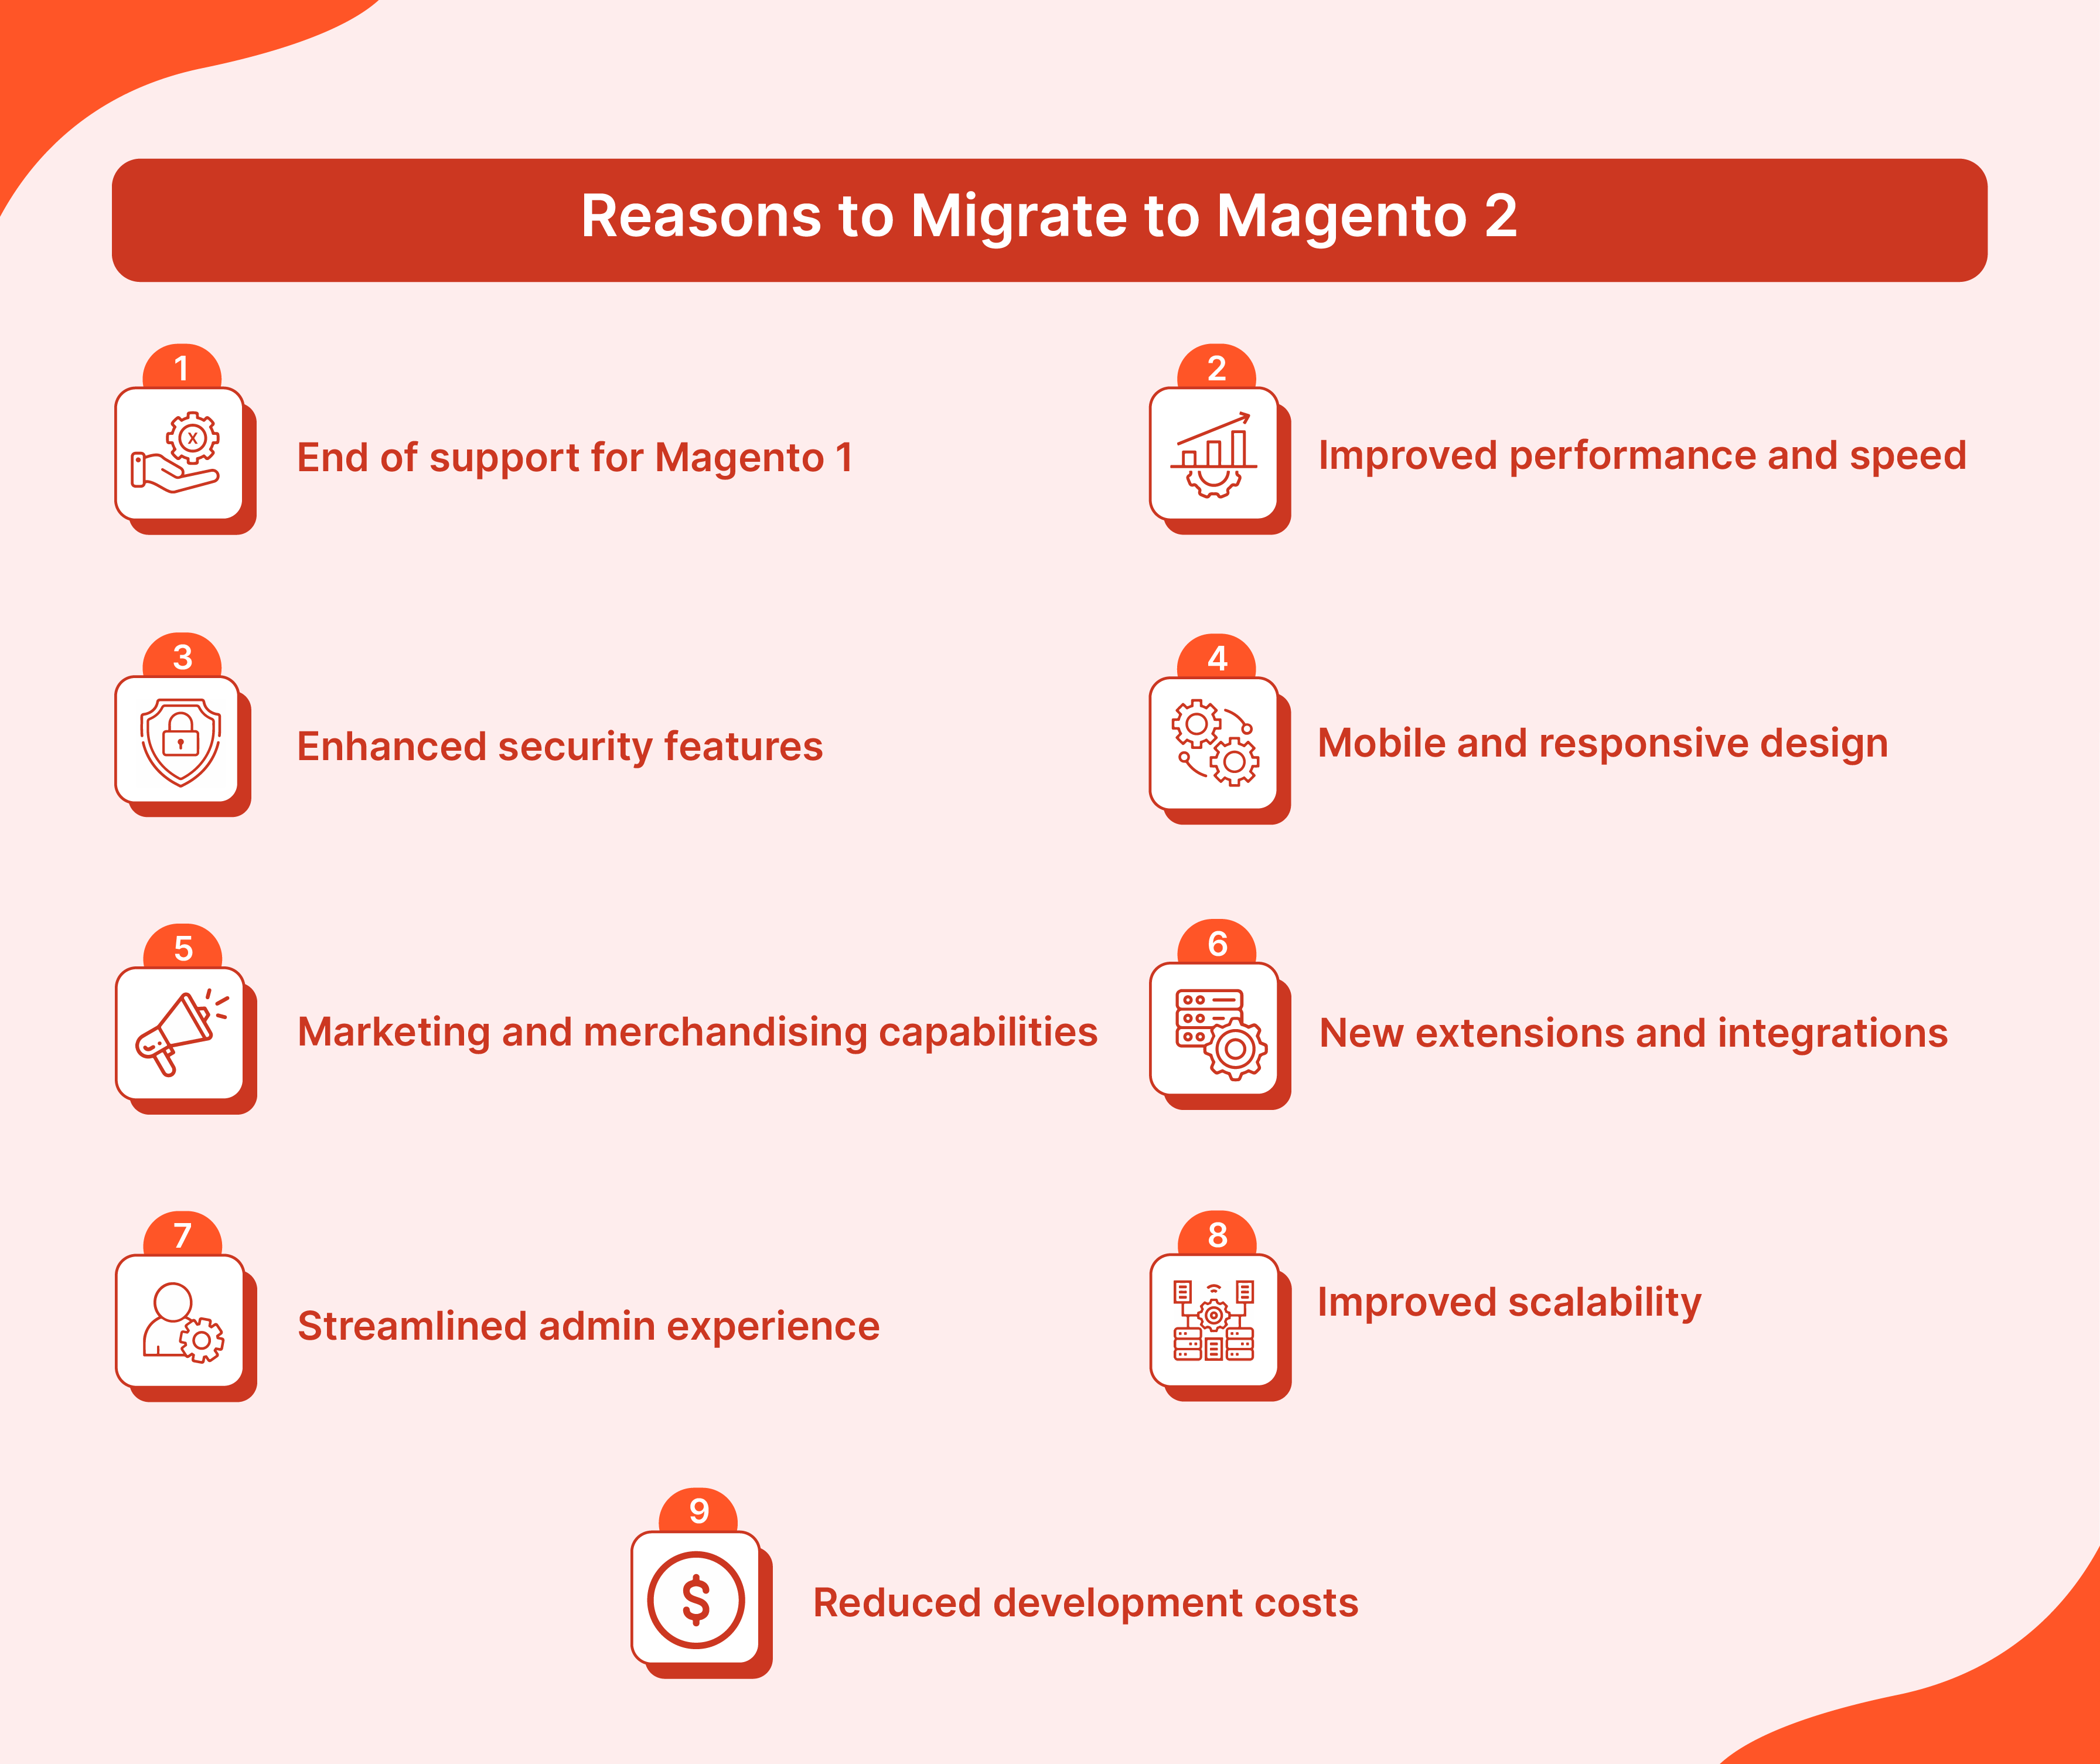 Key benefits of upgrading from Magento 1 to Magento 2